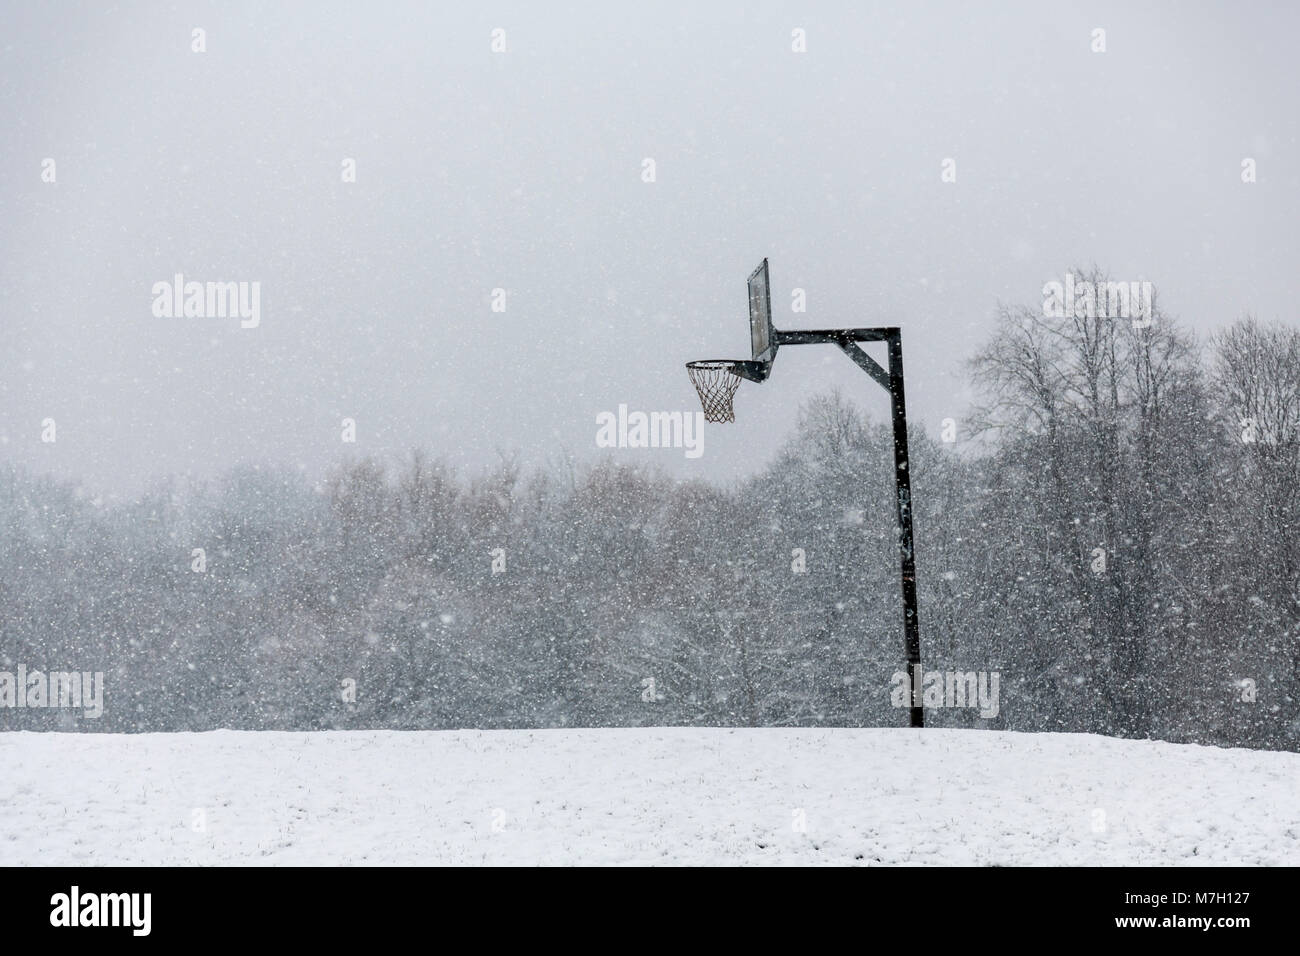 Basketball court in the snow Stock Photo